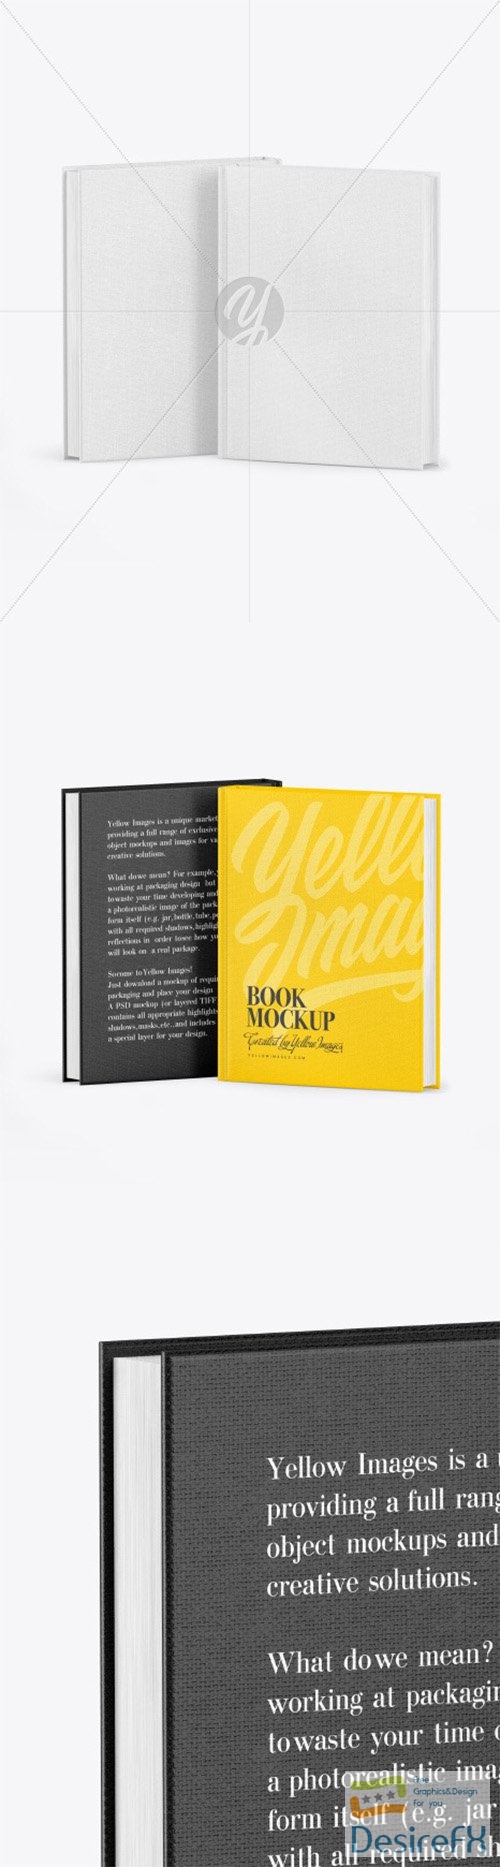 Two Hardcover Books w/ Fabric Covers Mockup 80361 TIF